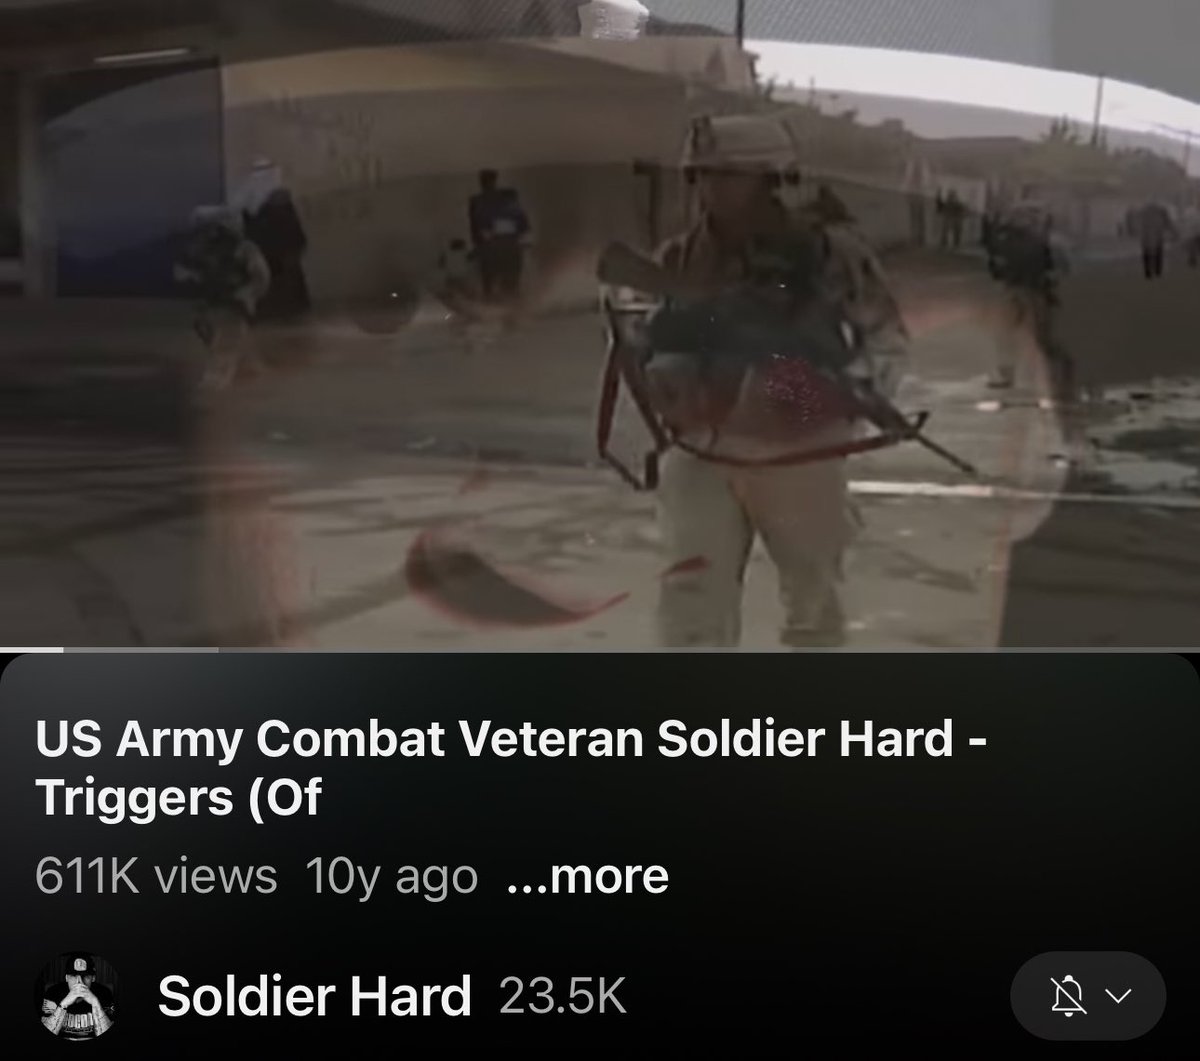 SUPPORT WARFIGHTER MUSIC!
*you can learn a lot listening to it

youtu.be/FtnWMCjHyQA?si…

@SoldierHard1